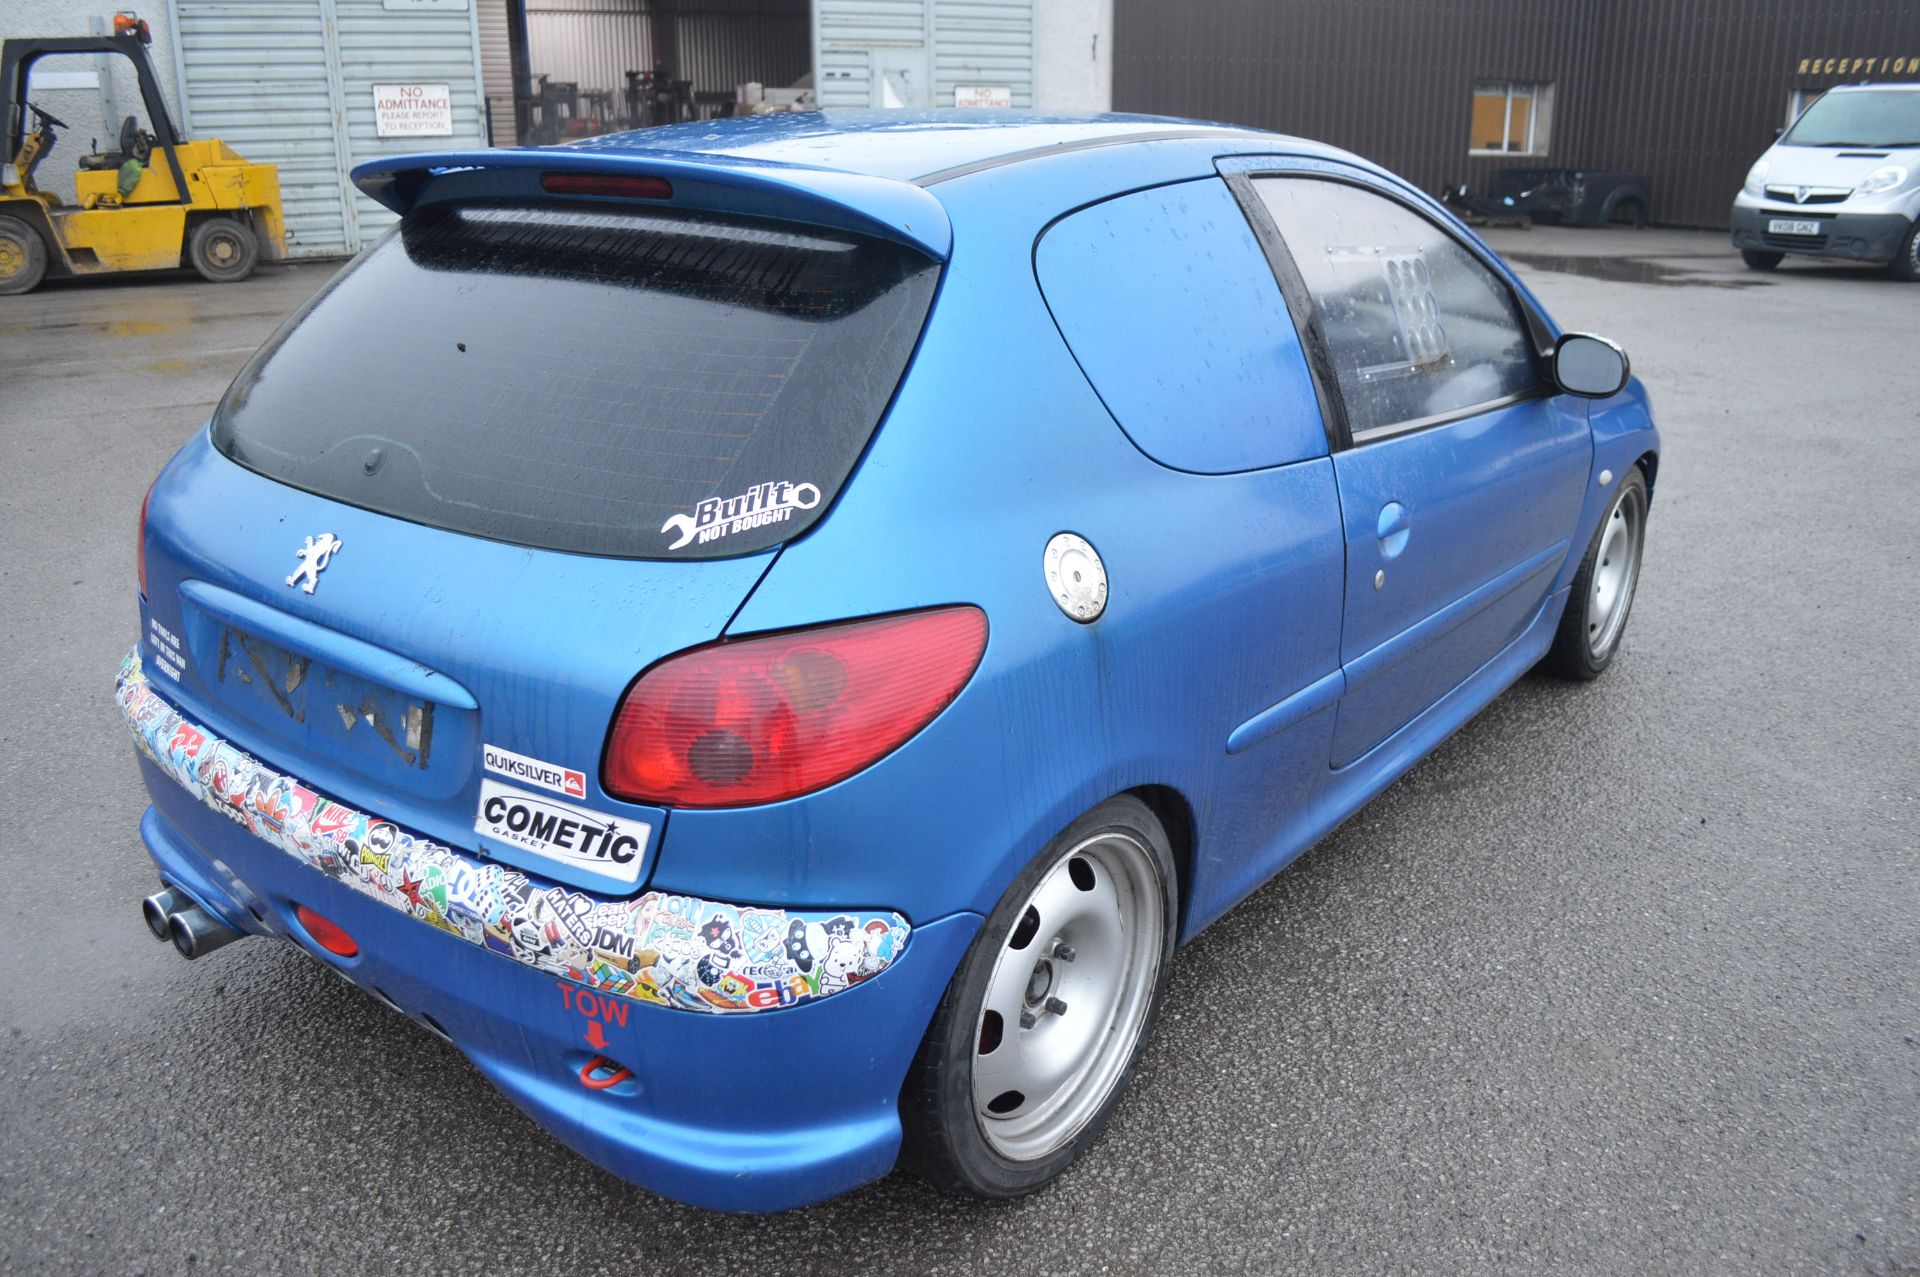 2003/03 REG PEUGEOT 206 GTI 180HP FAST TRACK DAY CAR  HAS THE 'VAN' PANELS FITTED INSTEAD OF REAR - Image 6 of 15